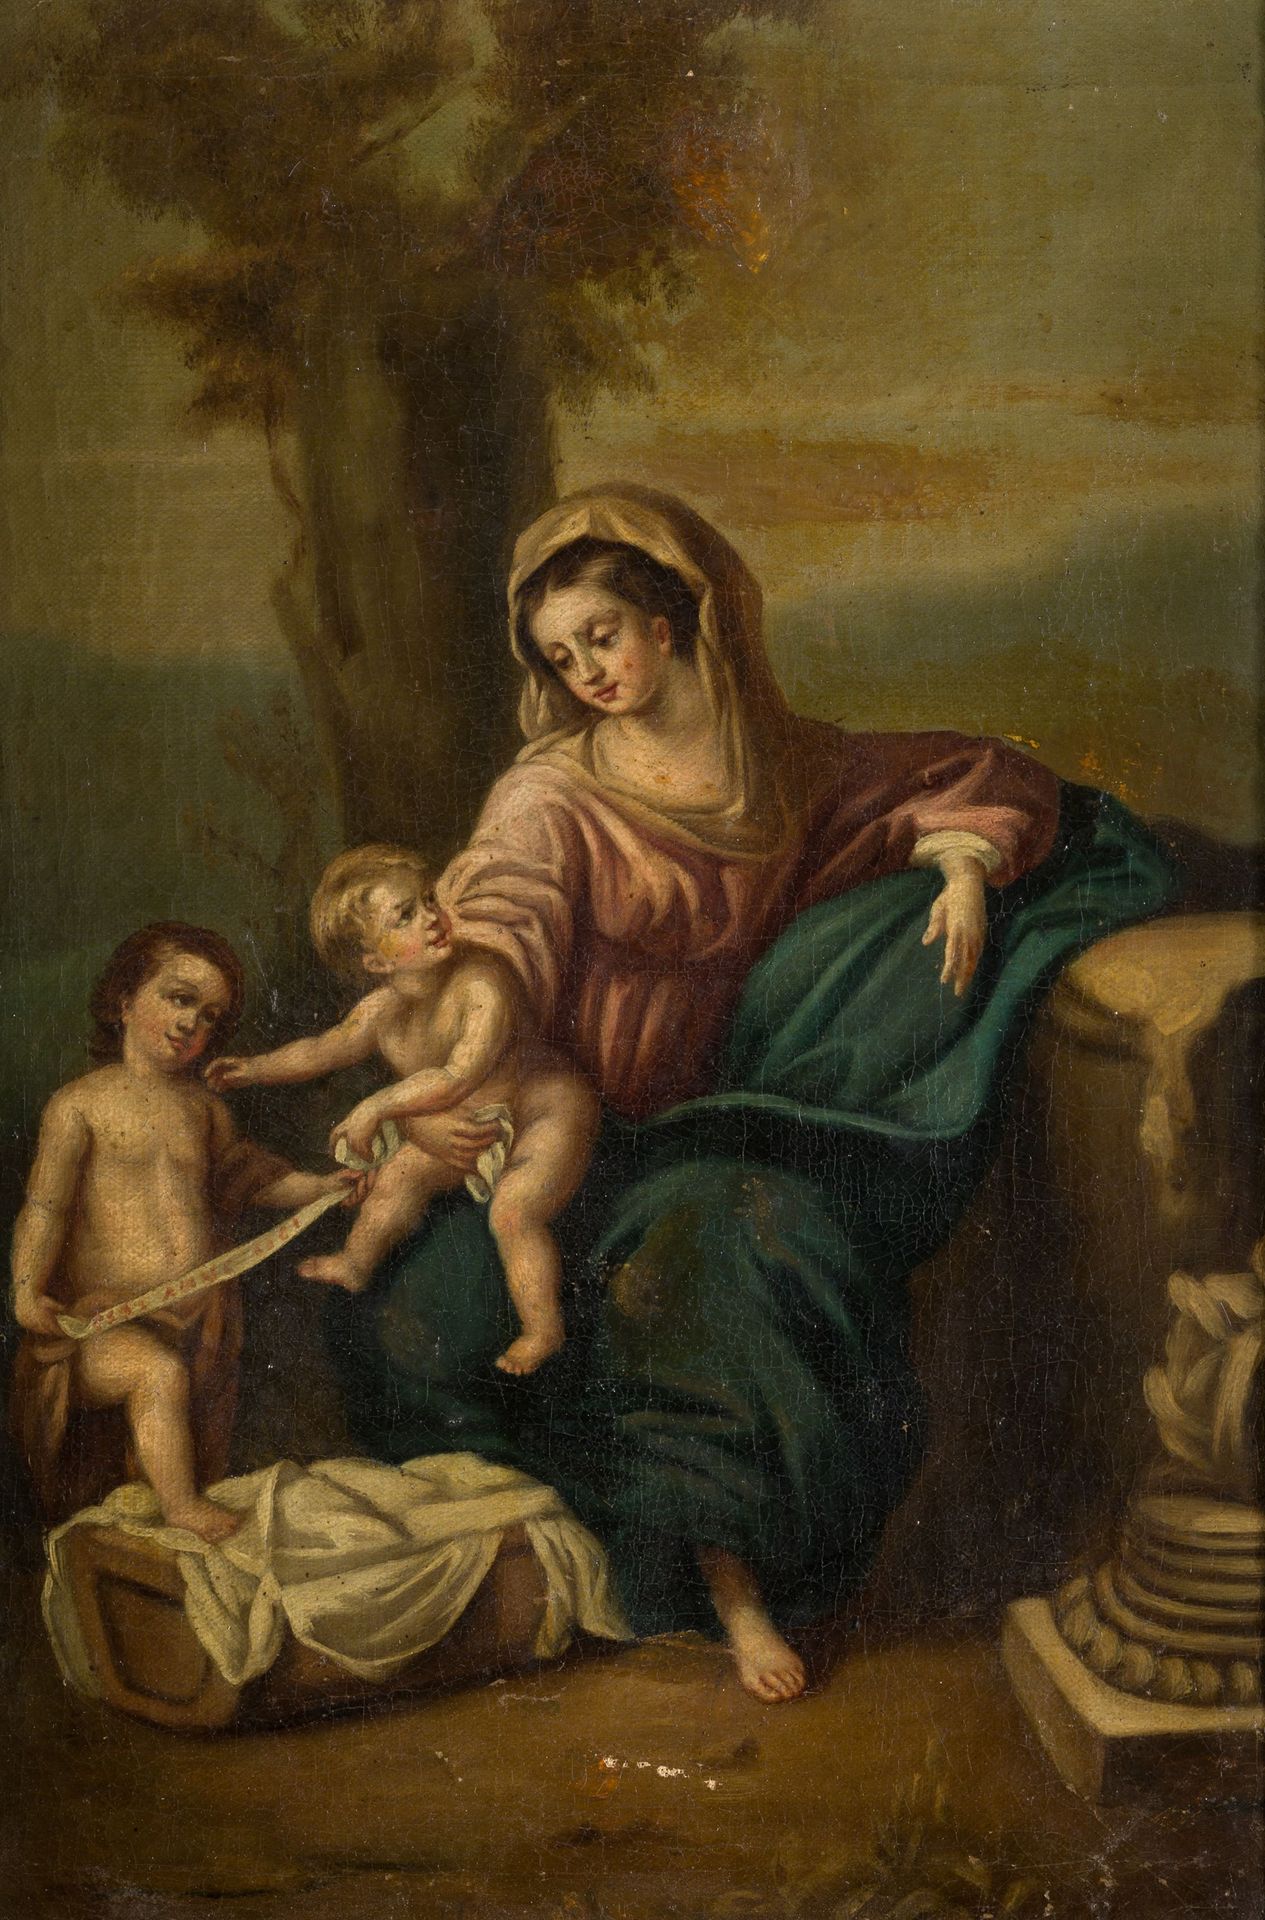 ANONYMOUS (C. 18th / C. 19th) “Holy Family" Huile sur toile. 40 x 28,5 cm